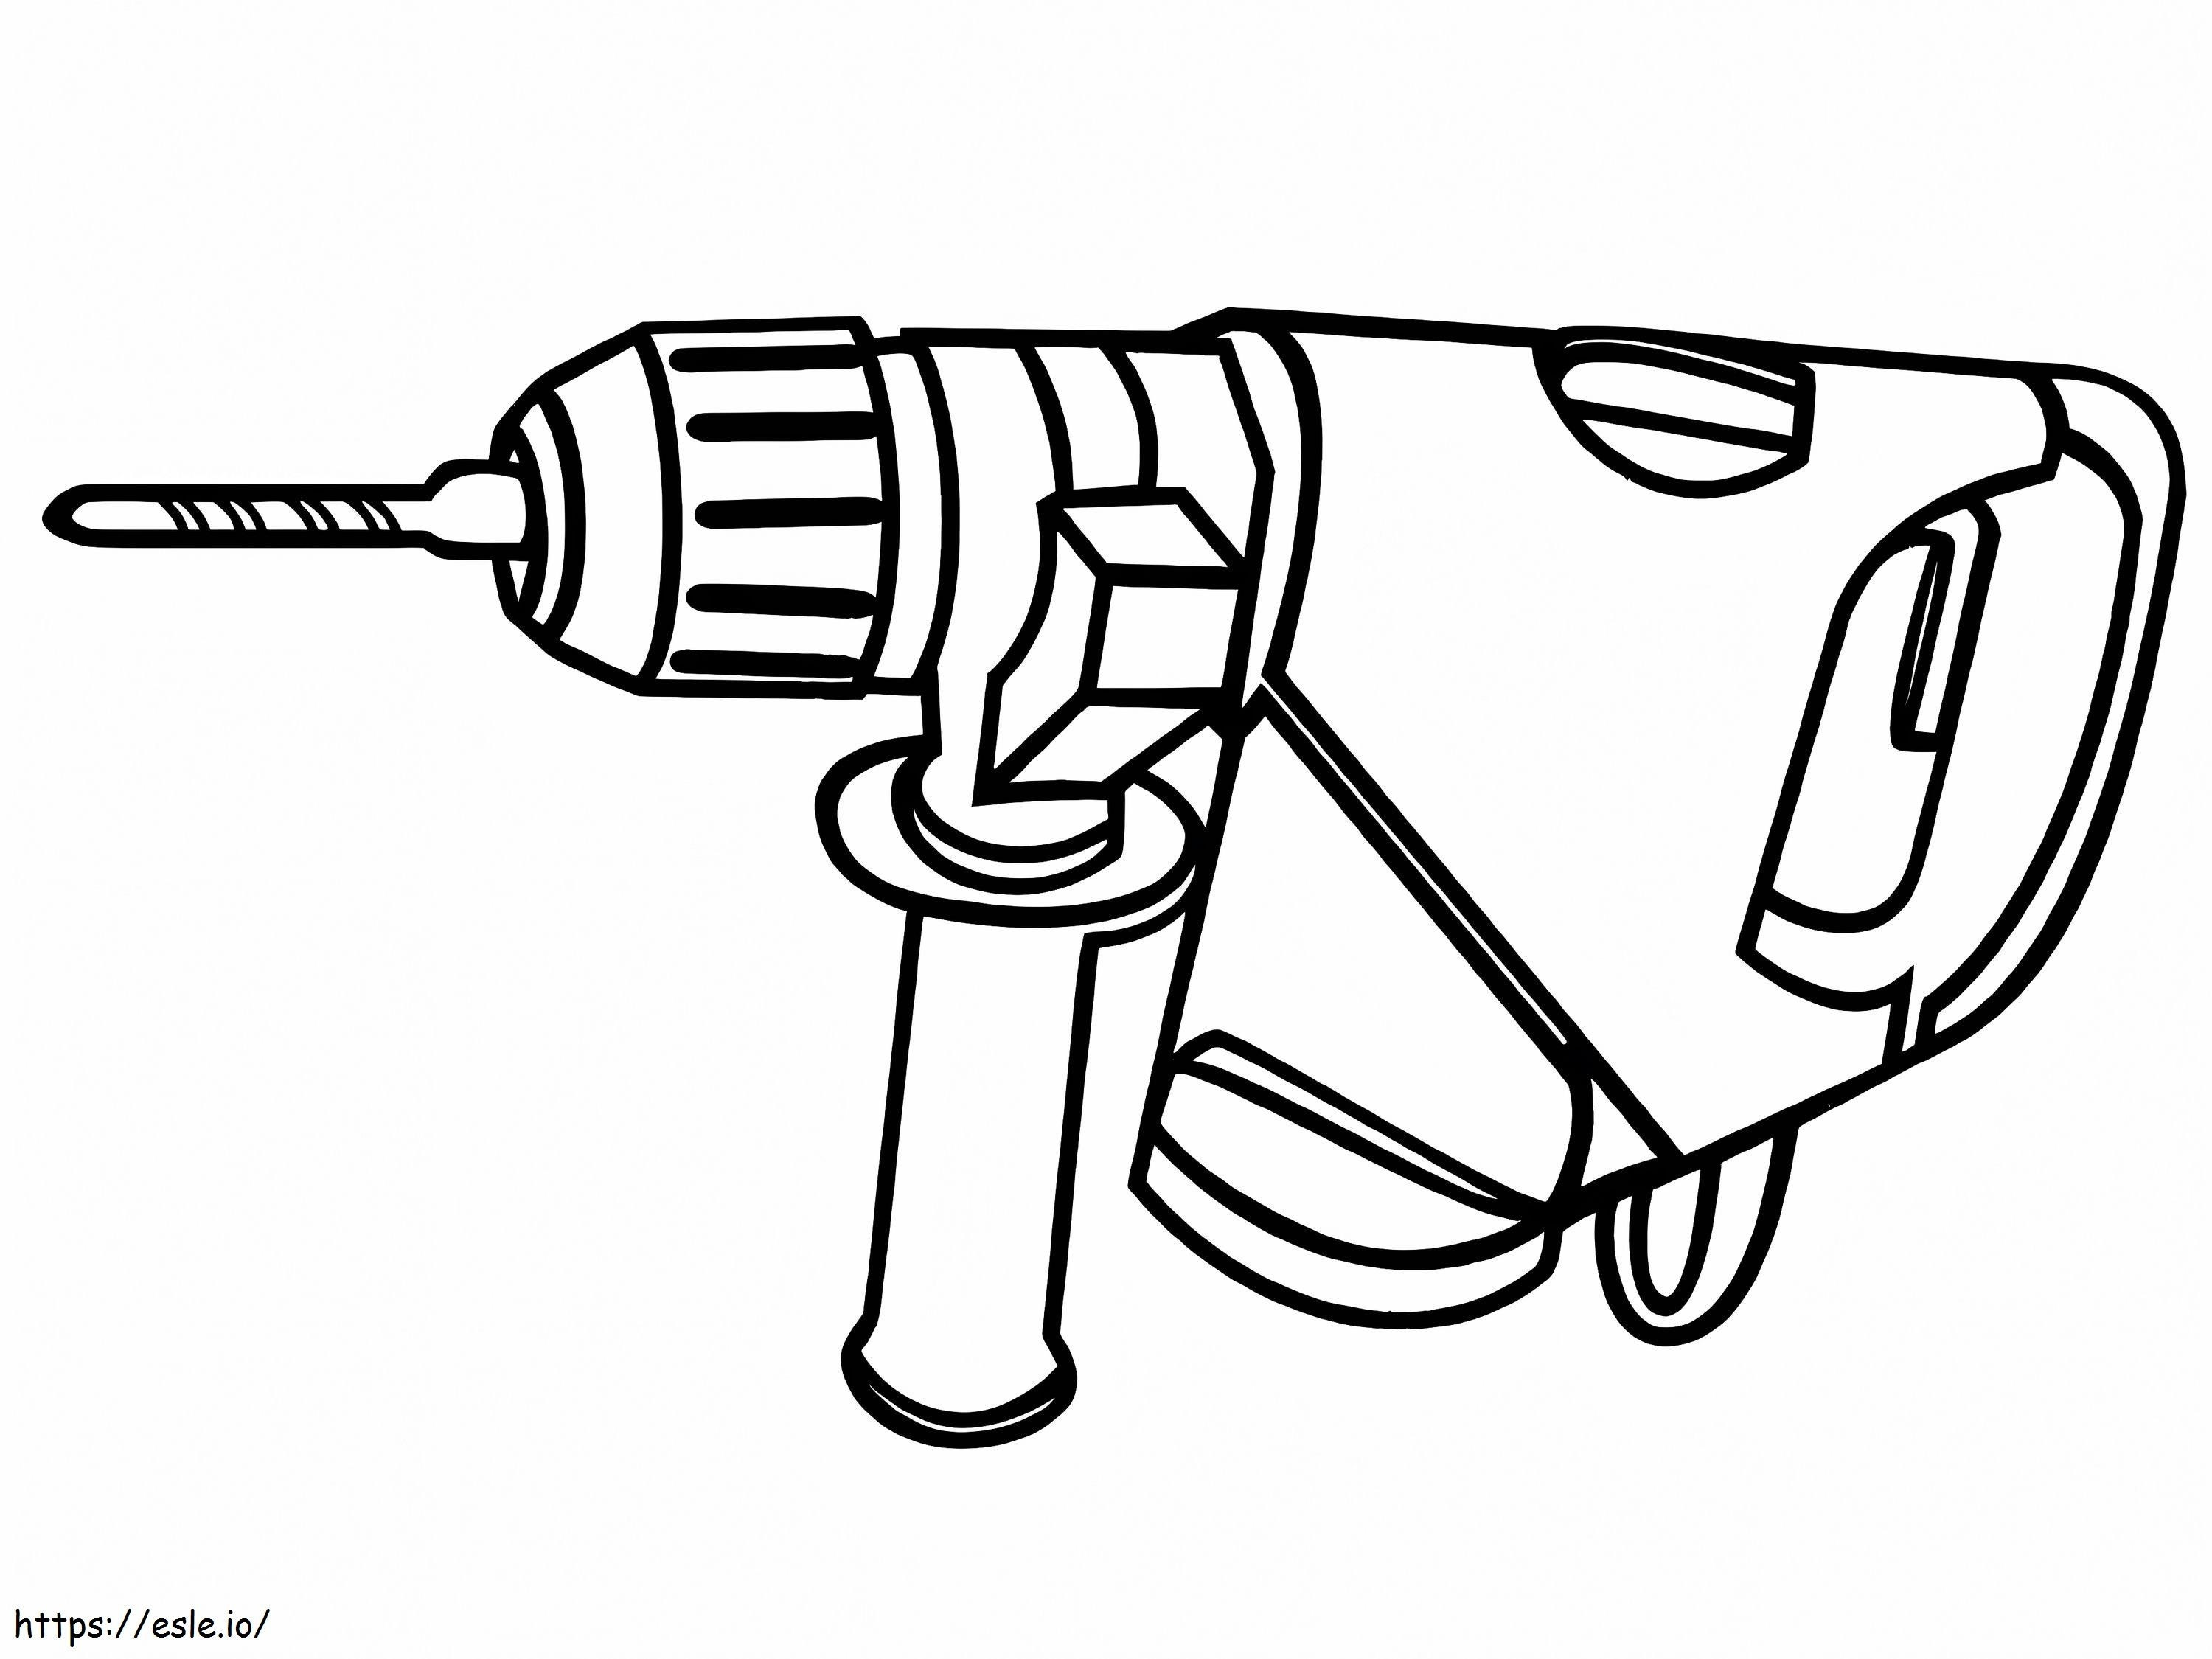 Drilling Machine coloring page